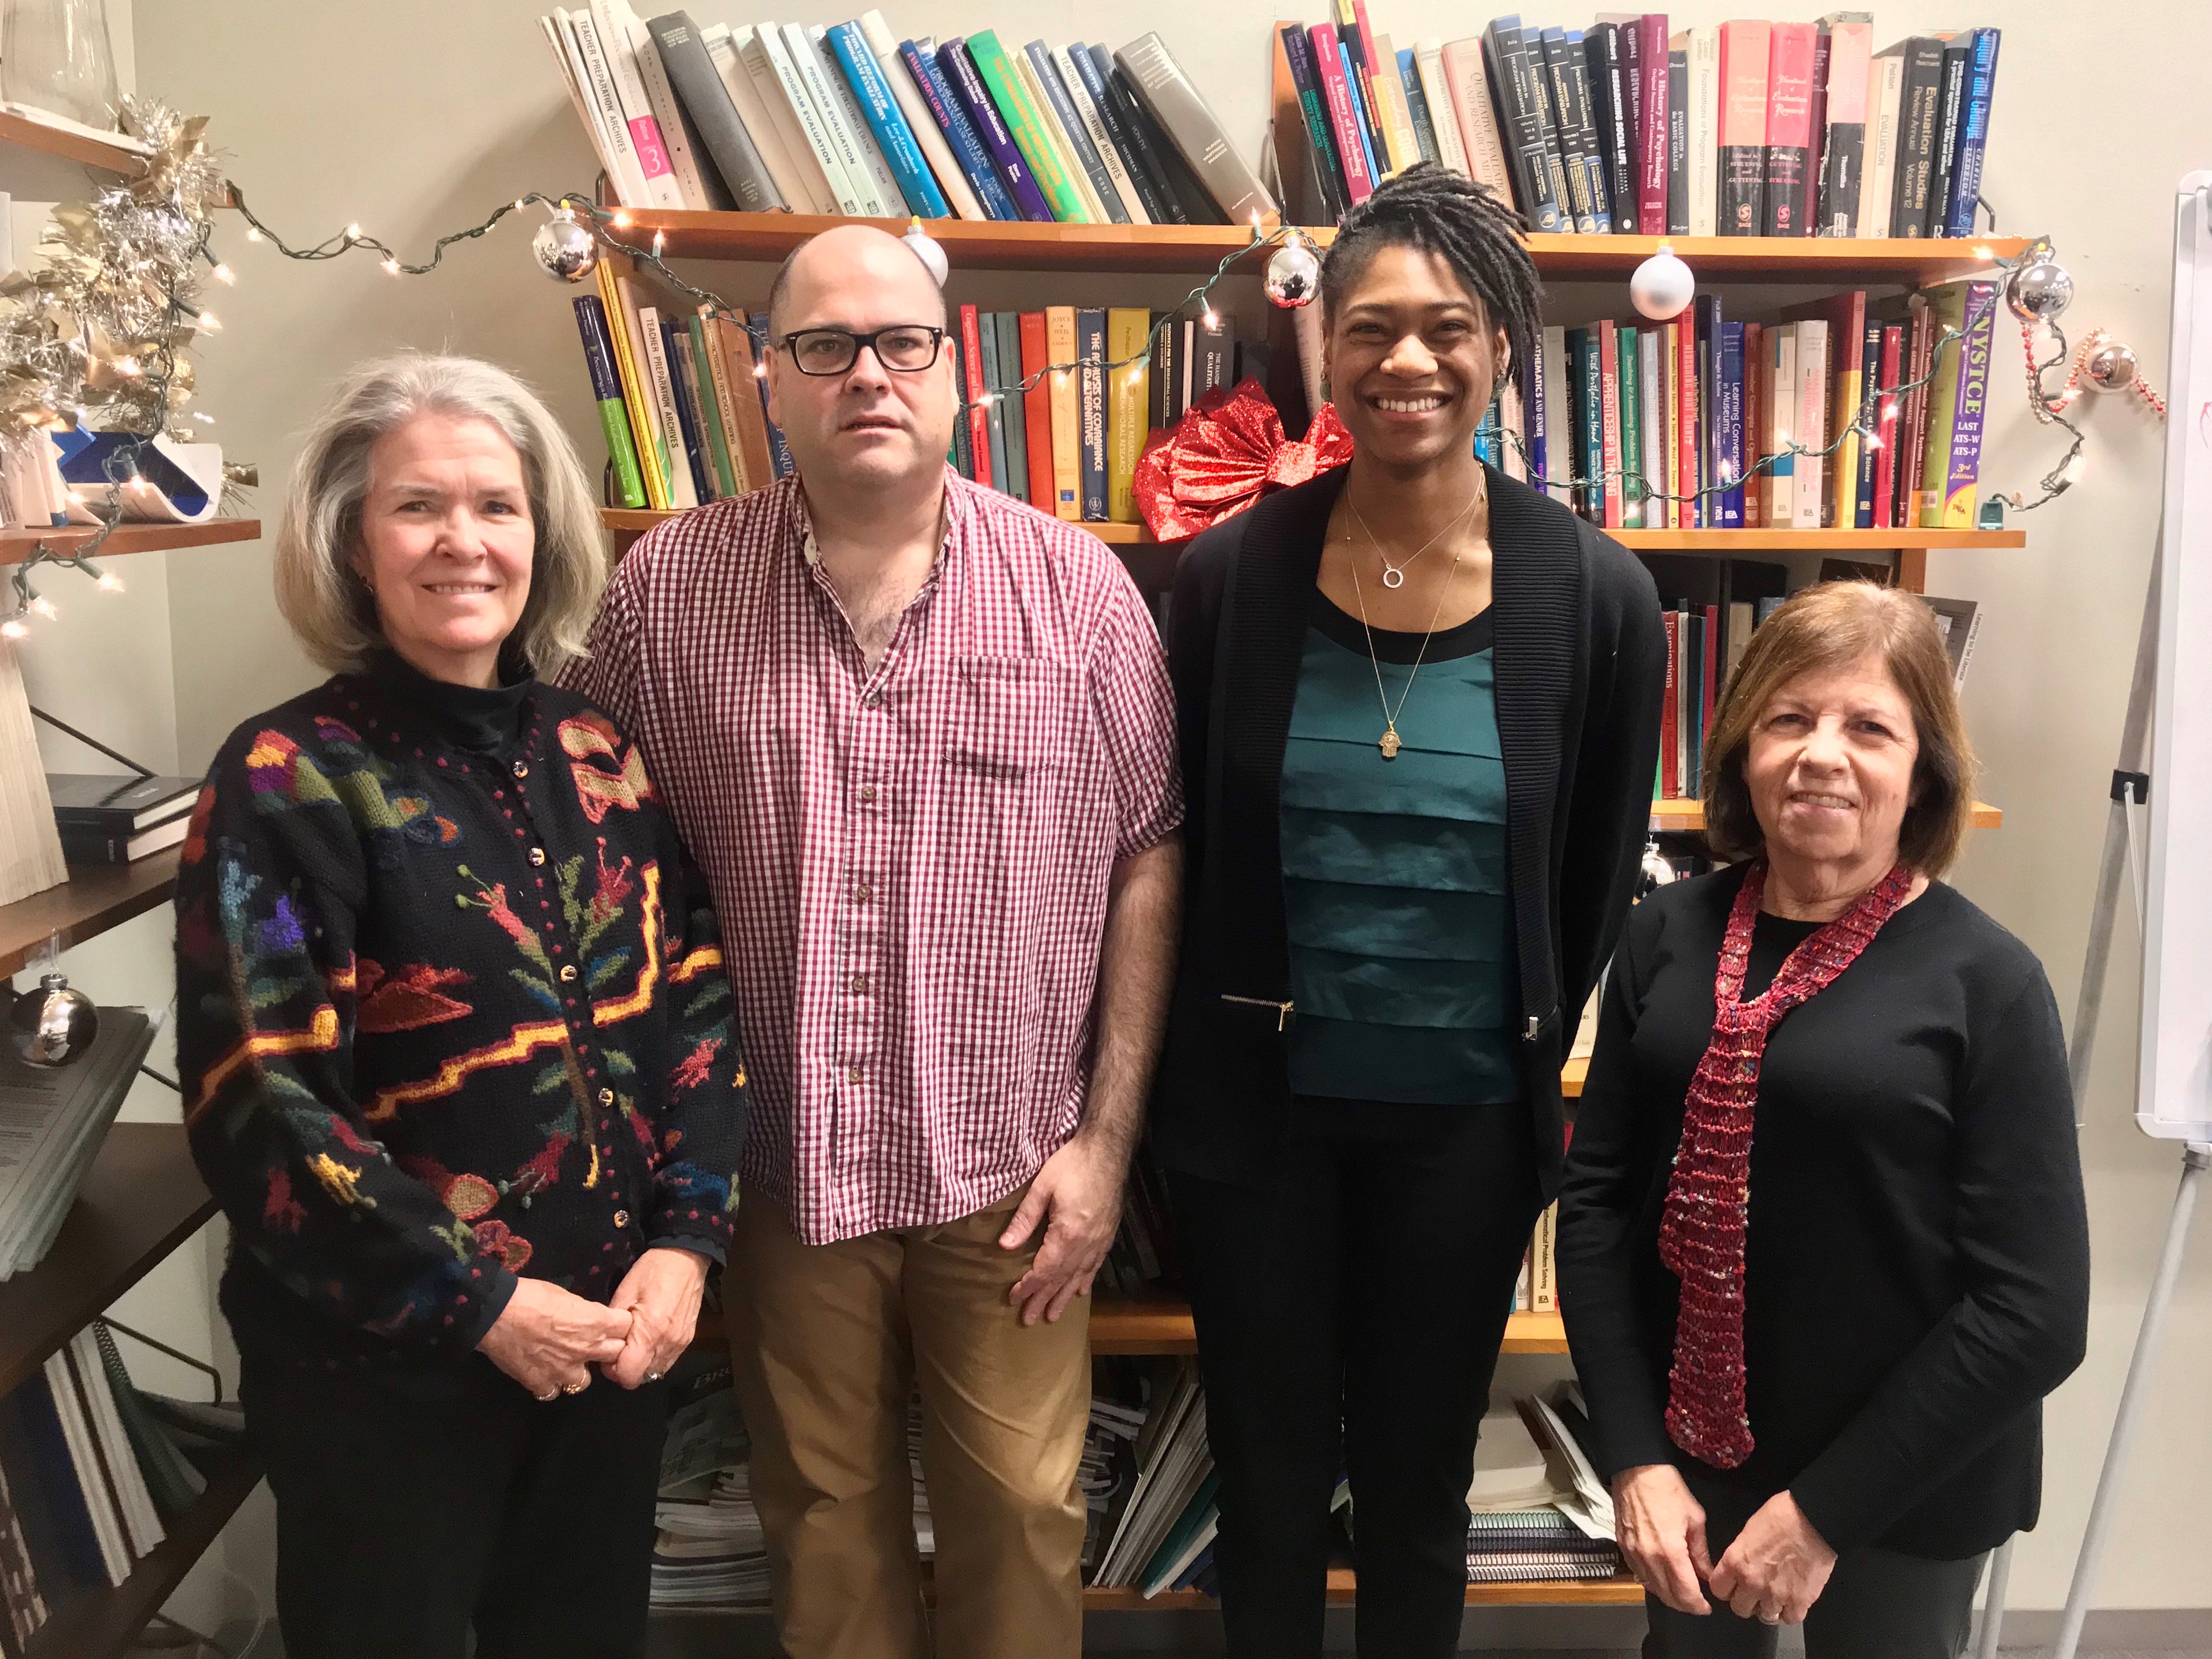 Ashley Davis and her dissertation proposal committee members. From right: Dr. Helen Johnson, Ashley Davis, Dr. Jay Verkuilen, Dr. Mary Foote